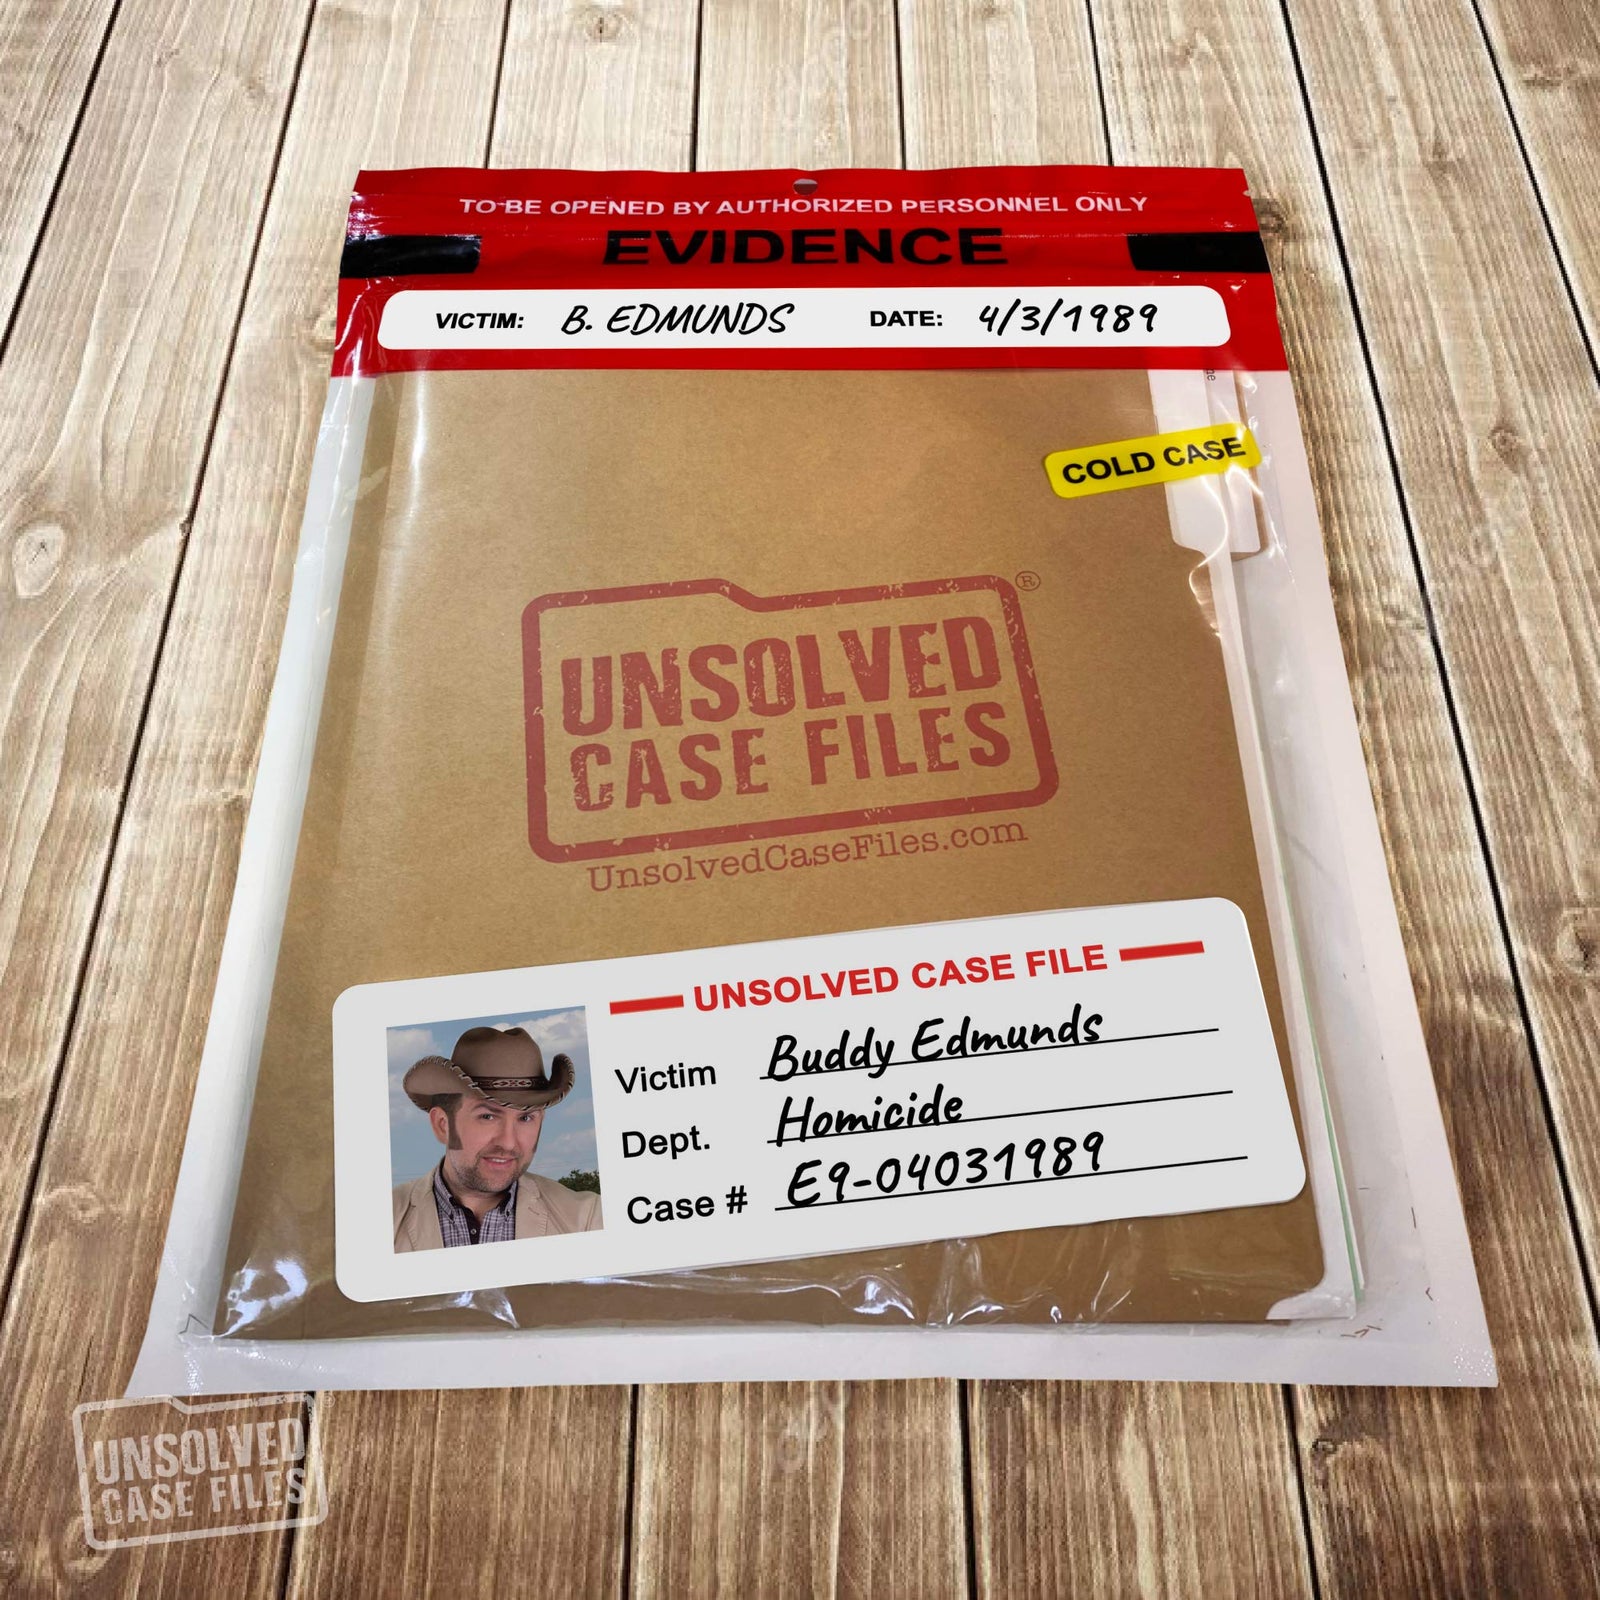 UNSOLVED CASE FILES | Edmunds, Buddy - Cold Case Murder Mystery Game | Can You Solve The Crime?